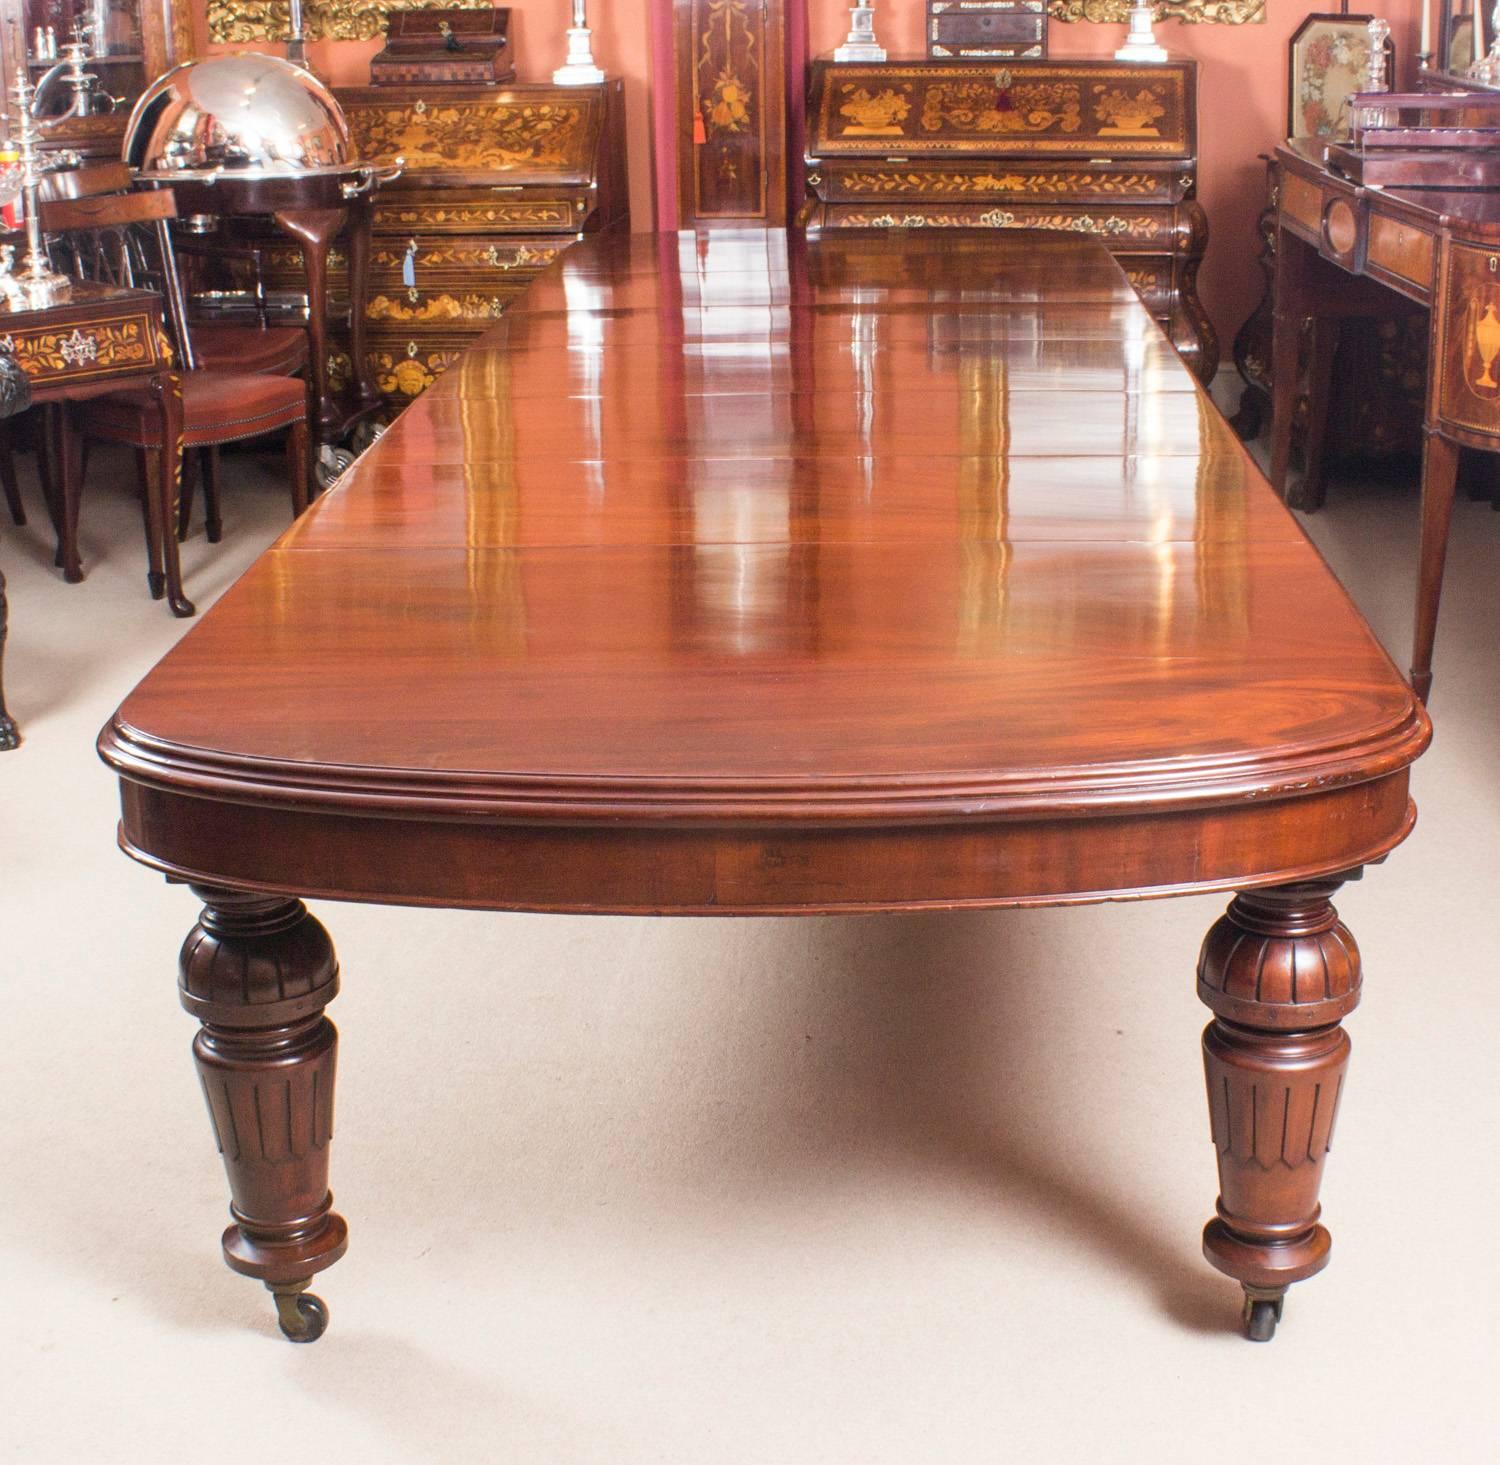 This is a magnificent antique Victorian solid mahogany D-end dining table which can seat sixteen diners in comfort and is also ideal for use as a conference table, circa 1870 in date.

This beautiful table is in stunning flame mahogany and has five